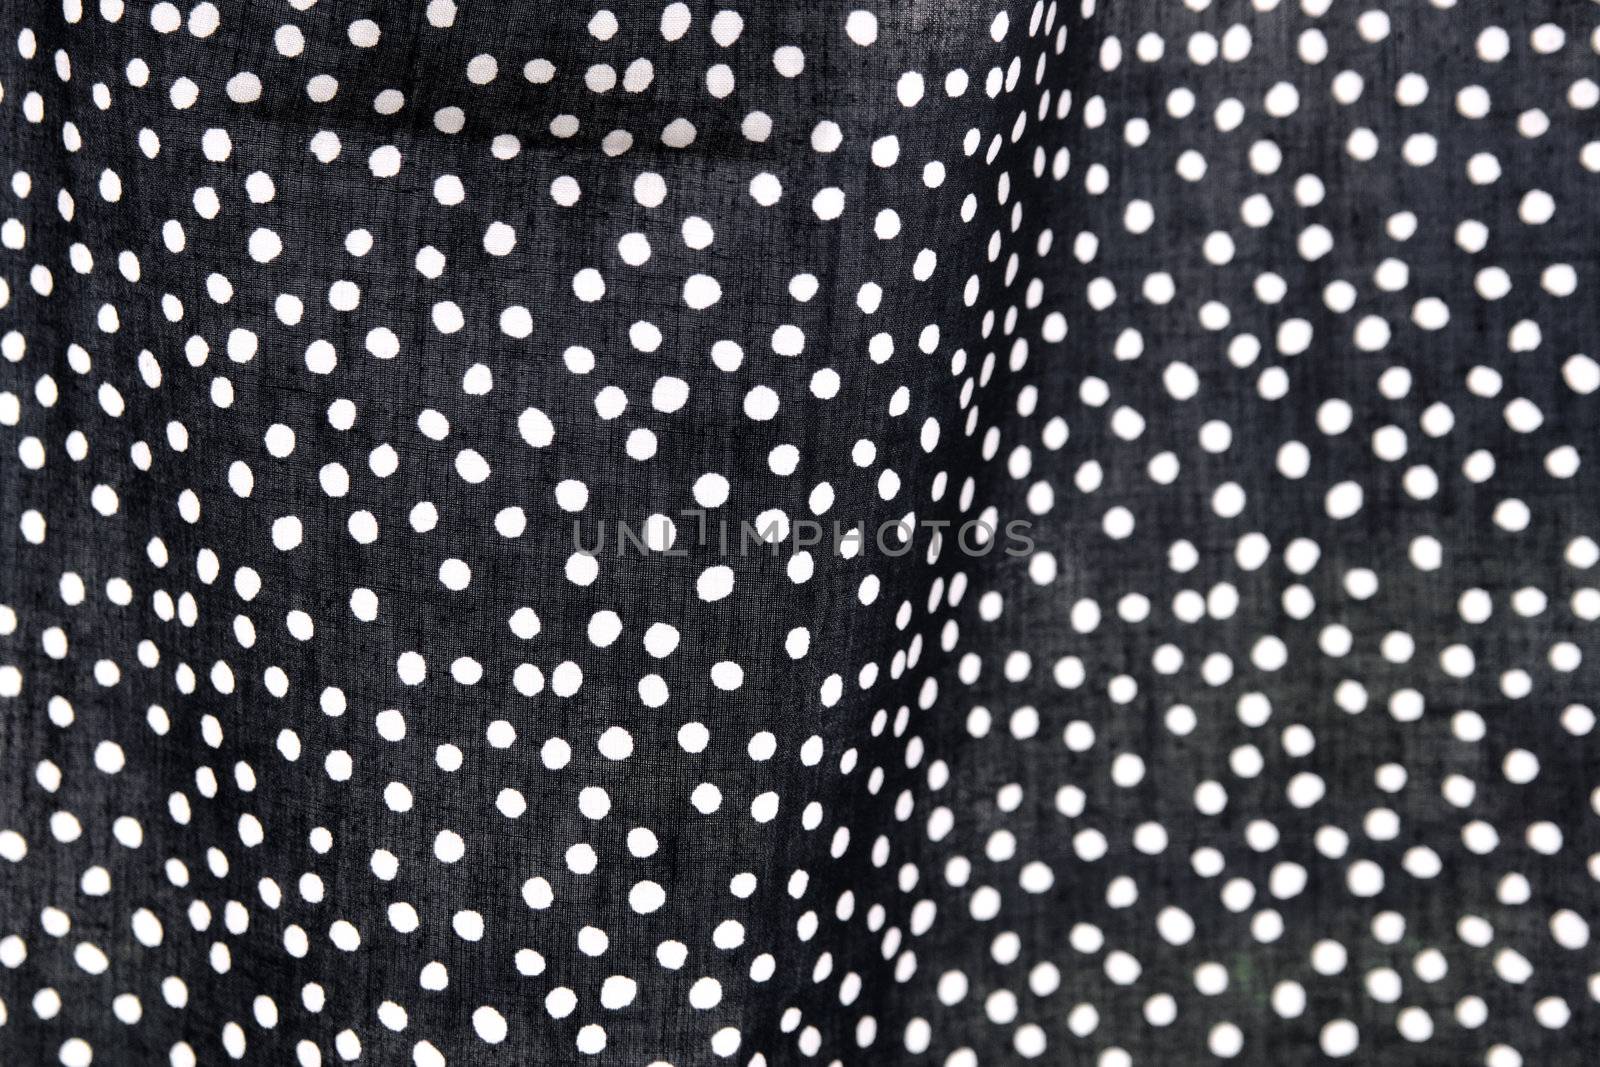 black and white polka dot fabric suitable for a background